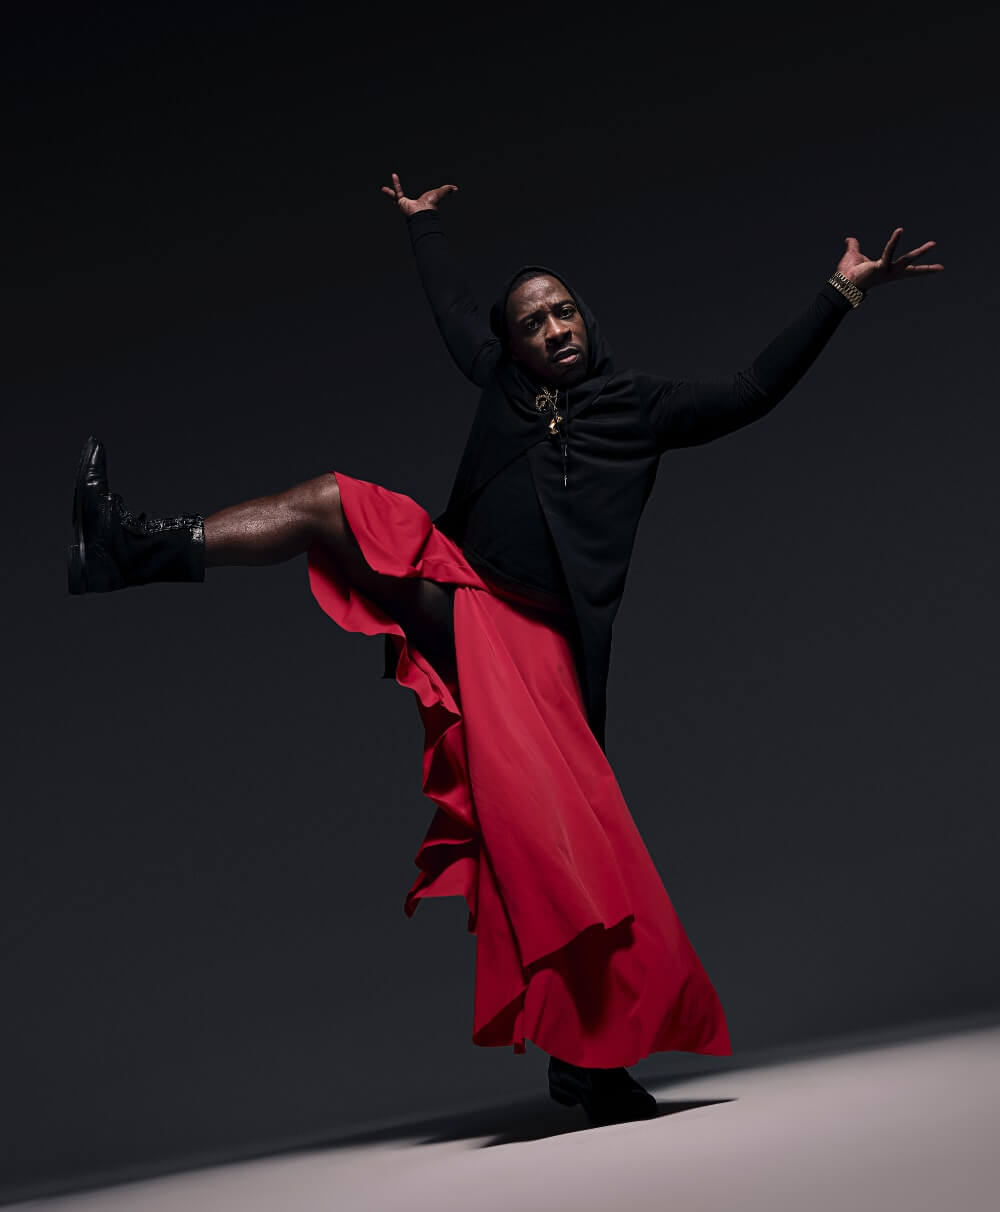 Black man dancing with one leg and both arms raised. He is wearing a long red skirt and a black long-sleeve shirt.